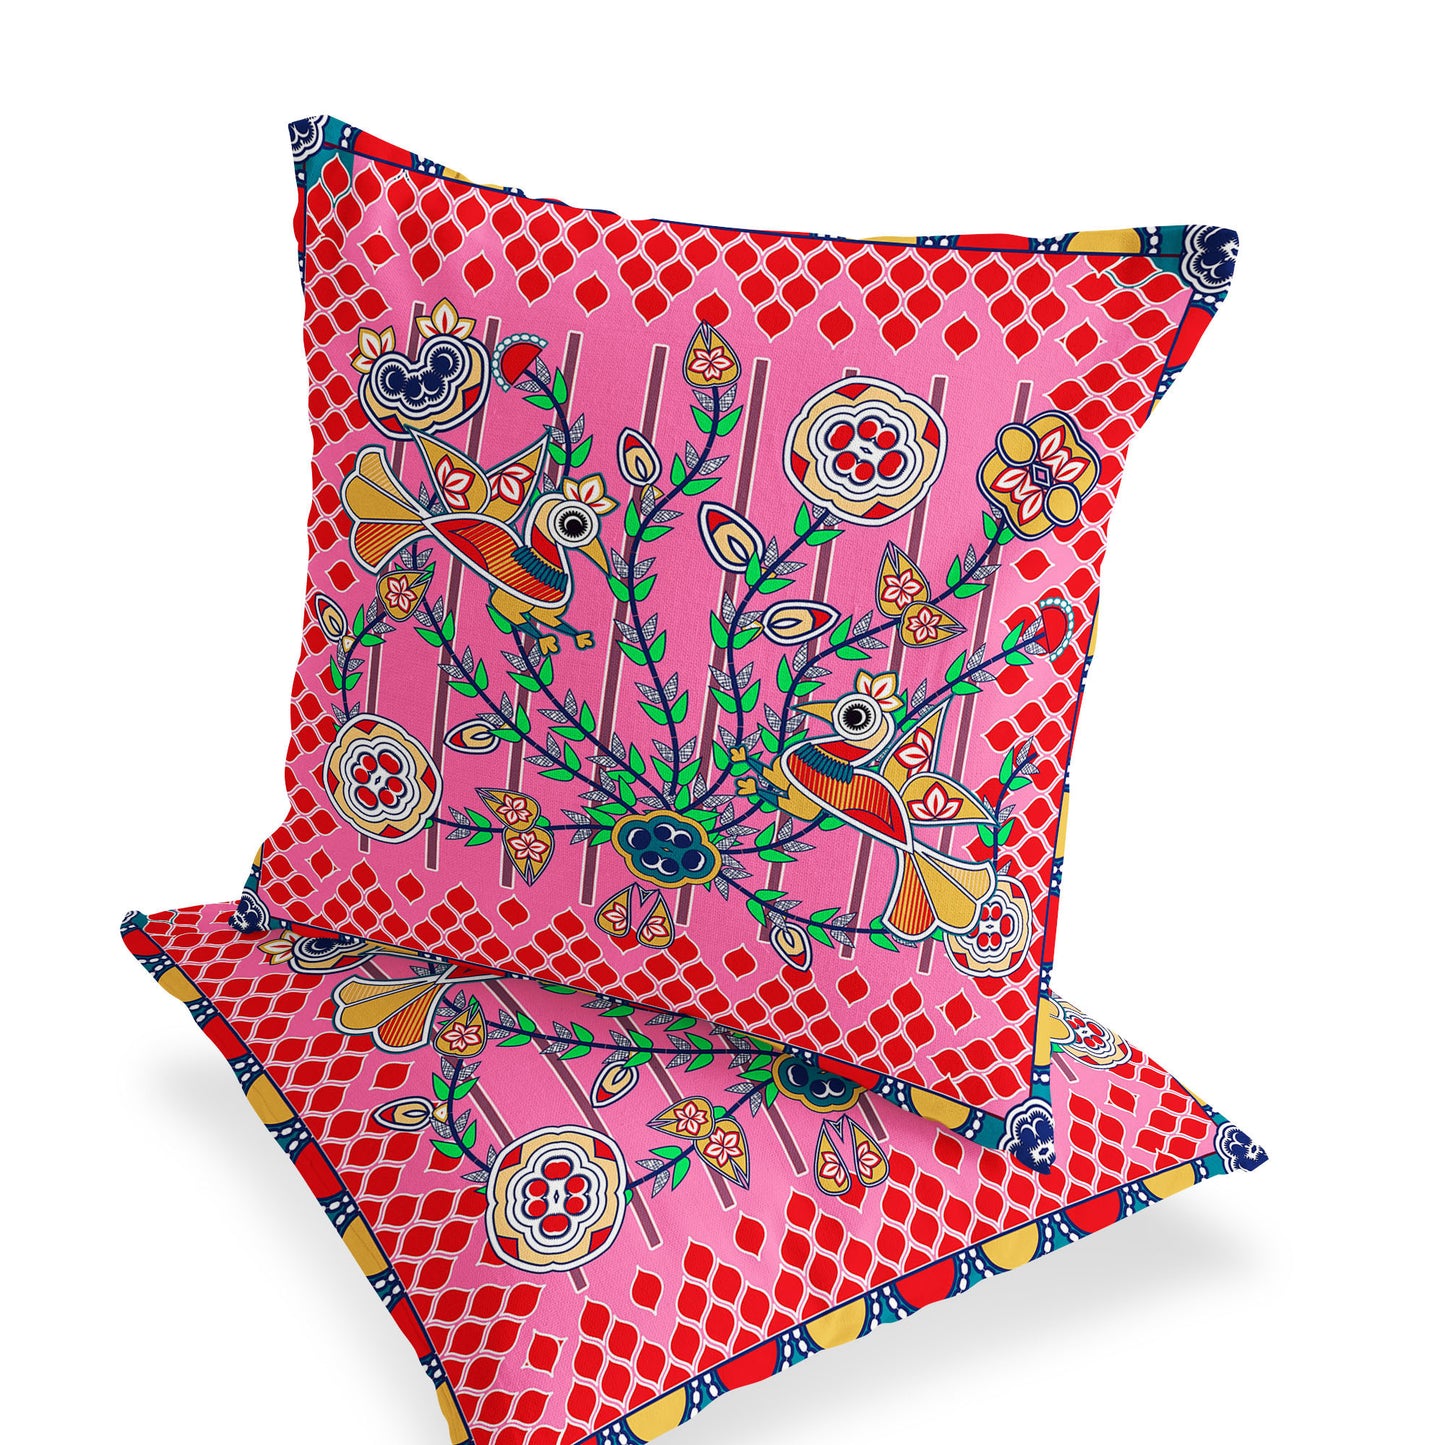 Set of Two 16" X 16" Red and Pink Peacock Blown Seam Floral Indoor Outdoor Throw Pillow